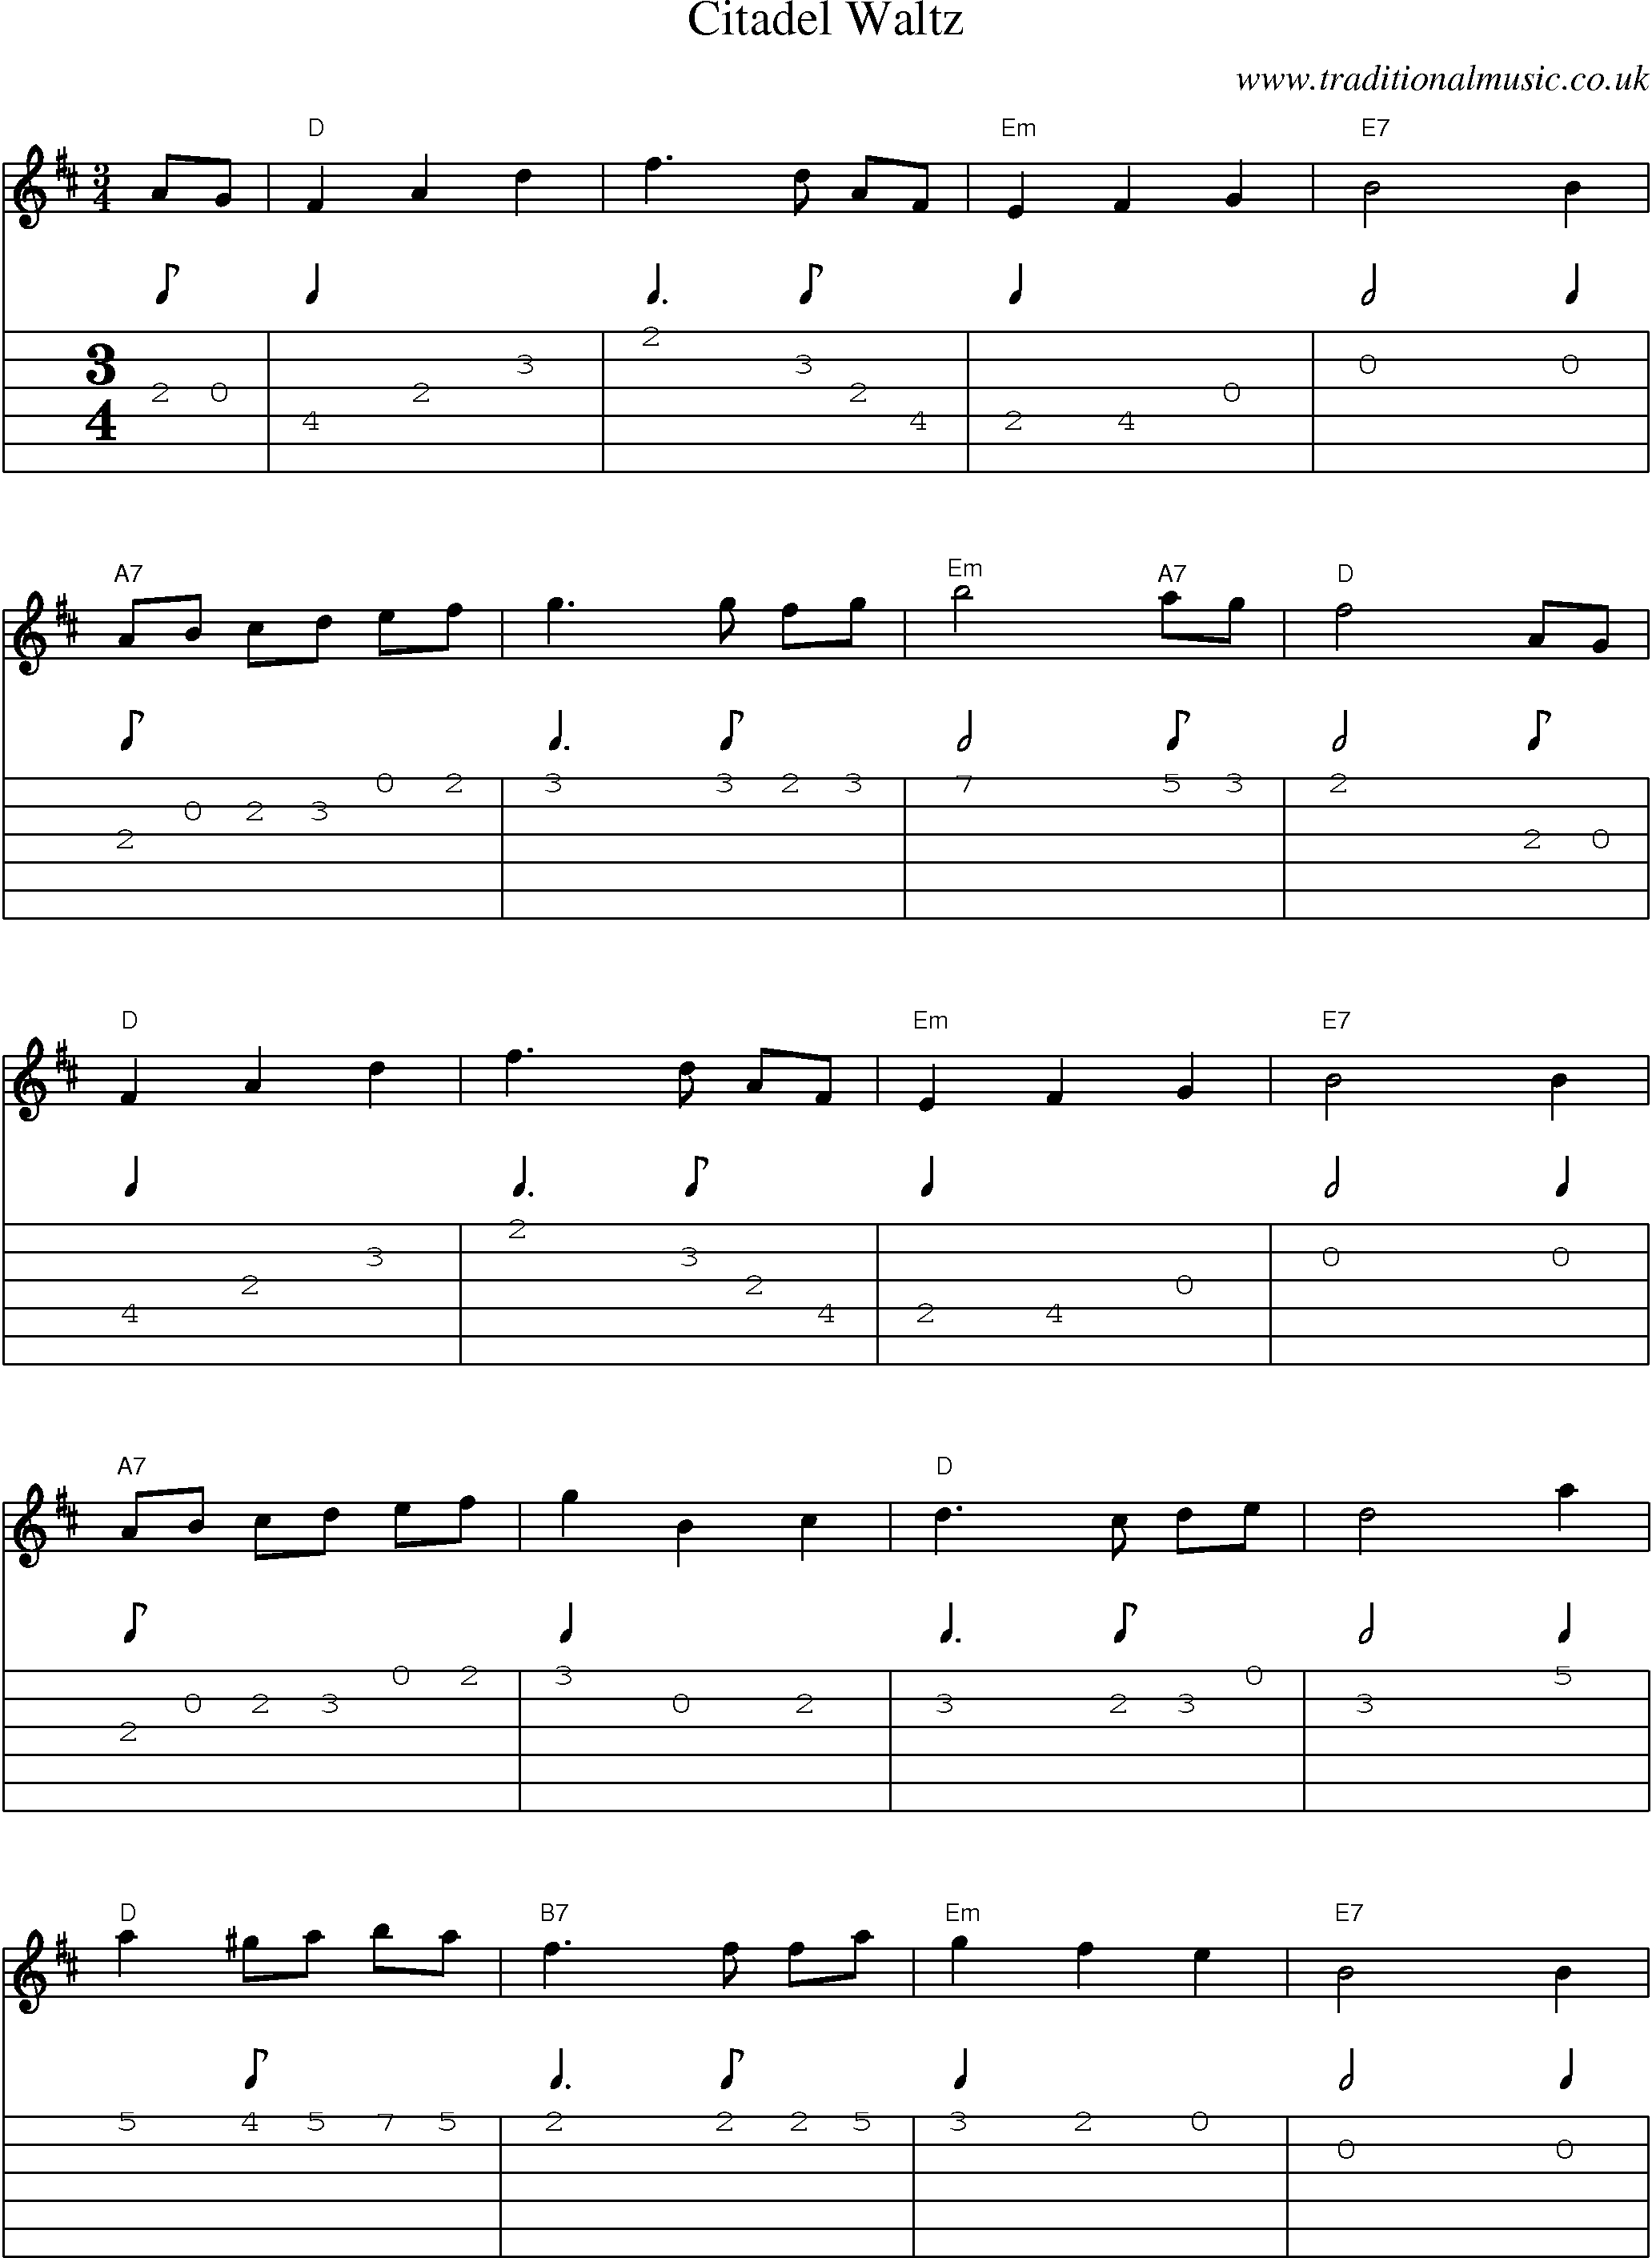 Music Score and Guitar Tabs for Citadel Waltz